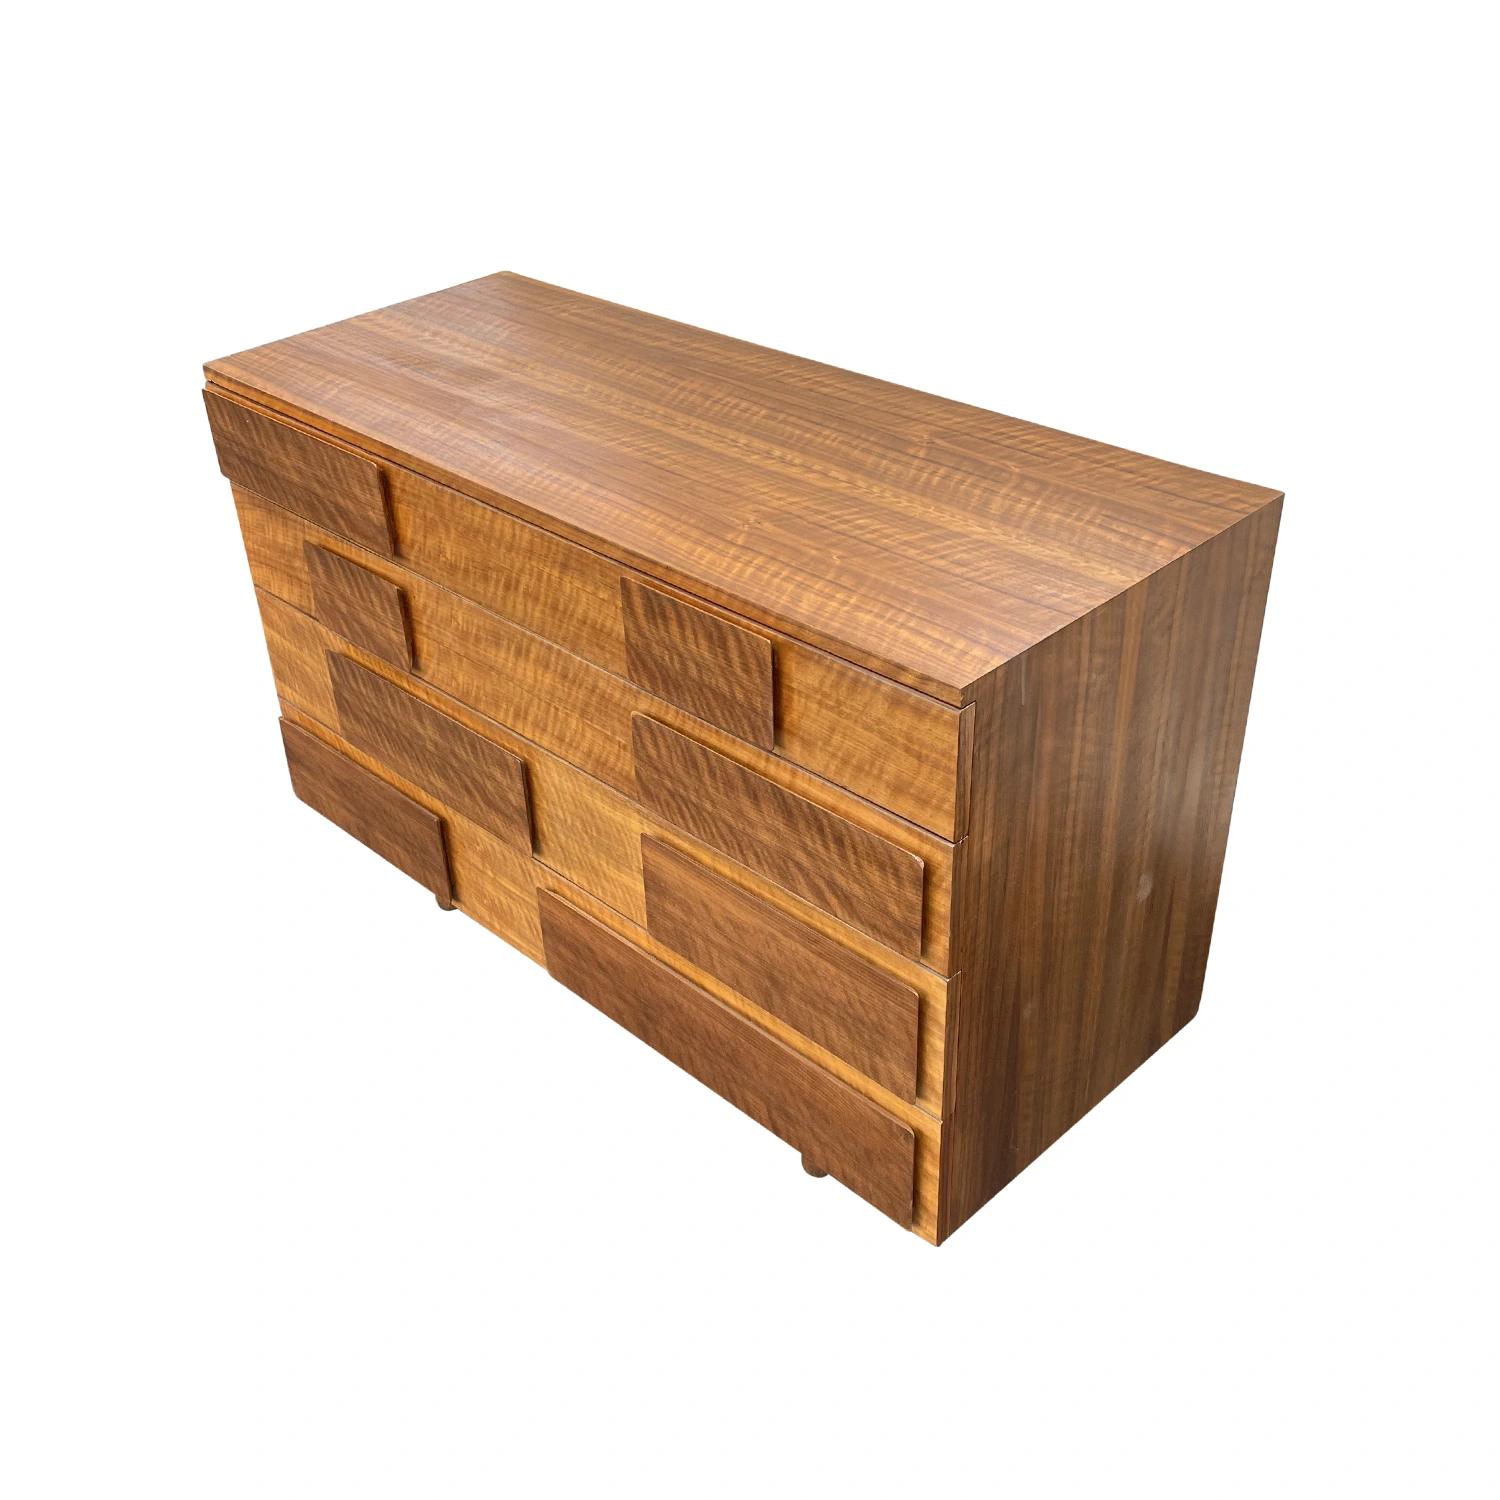 20th Century Brown Italian Walnut M. Singer & Sons Dresser, Cabinet by Gio Ponti For Sale 1